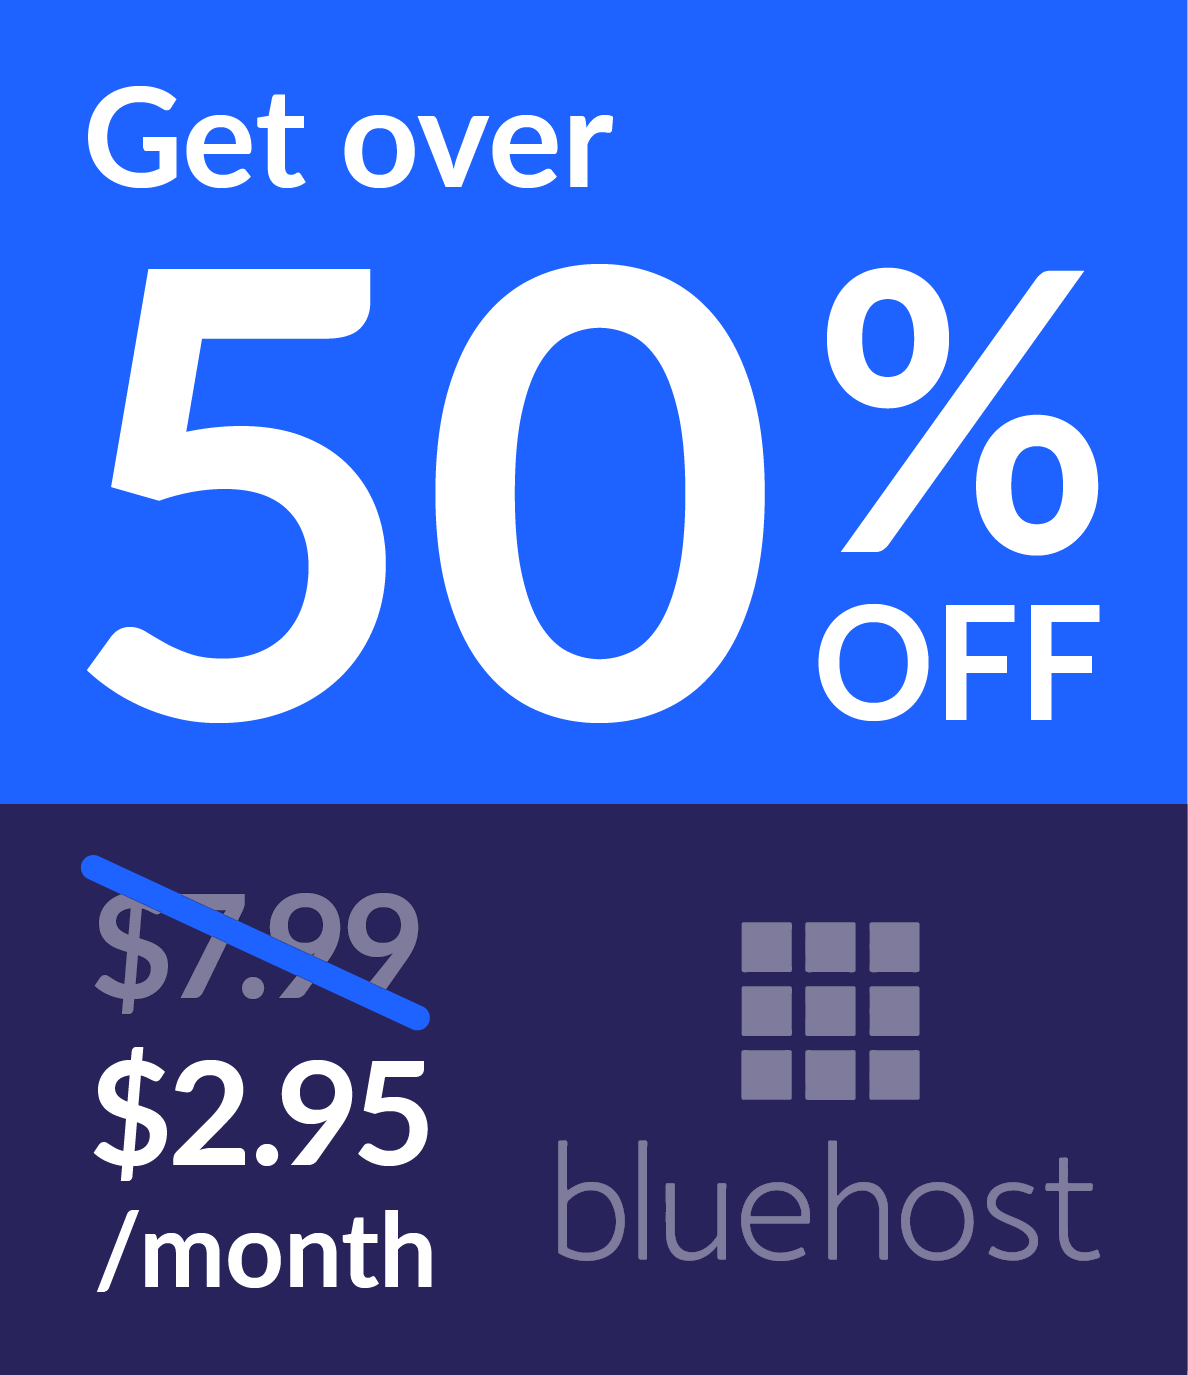 bluehost discount information